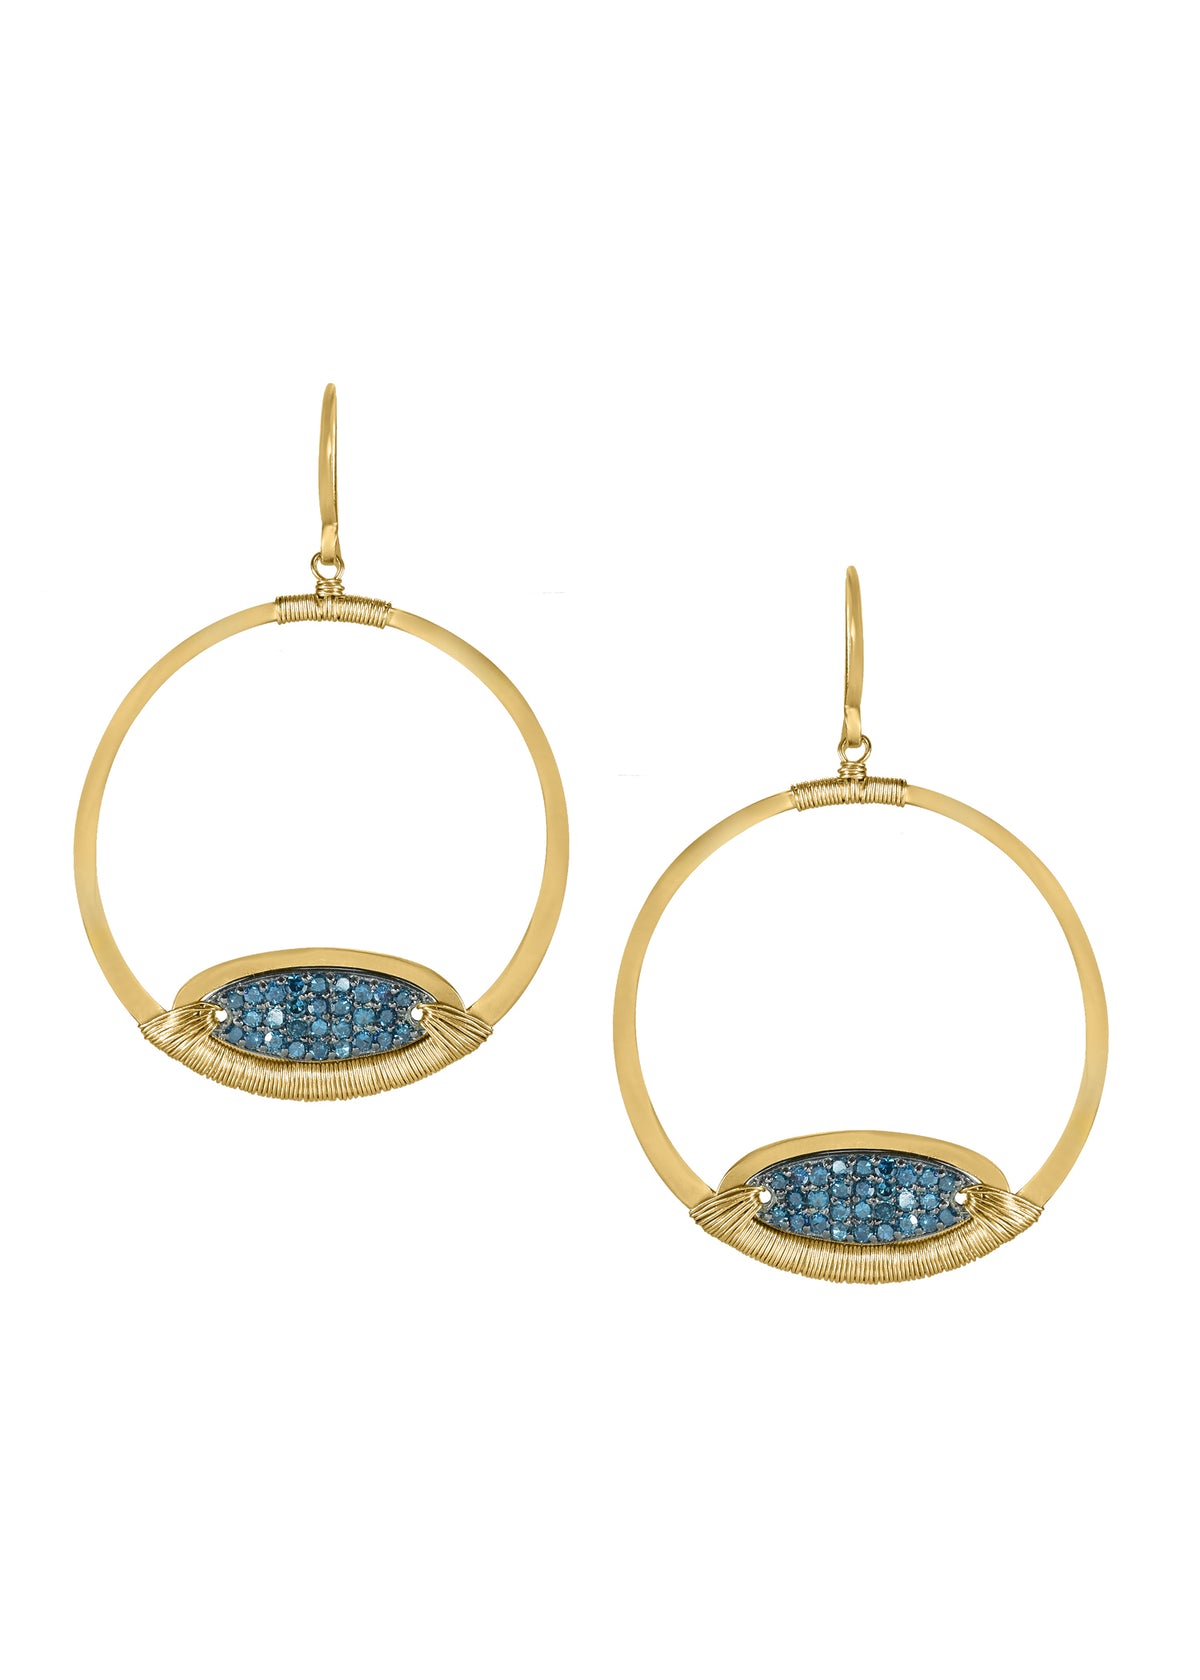 Blue diamond 14k gold Sterling silver Mixed metal Special order only Earrings measure 1-3/4&quot; in length (including the ear wires) and 1 1/4&quot; in width Handmade in our Los Angeles studio